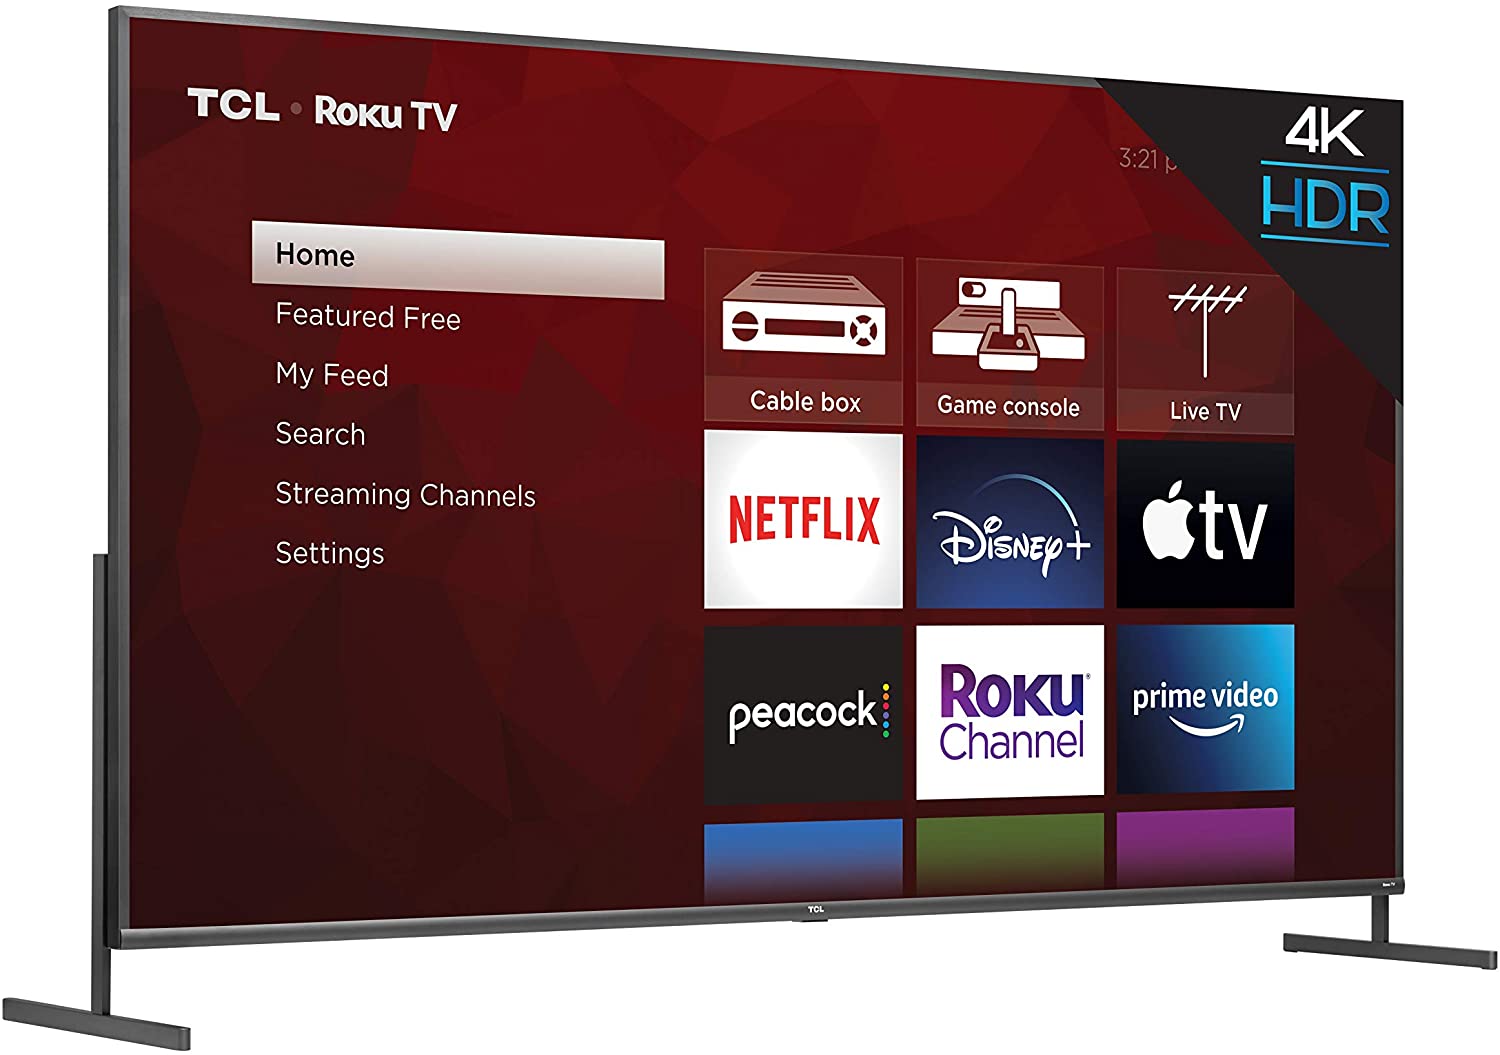 TCL’s $1,600 85-scurry 4K TV is now available within the market